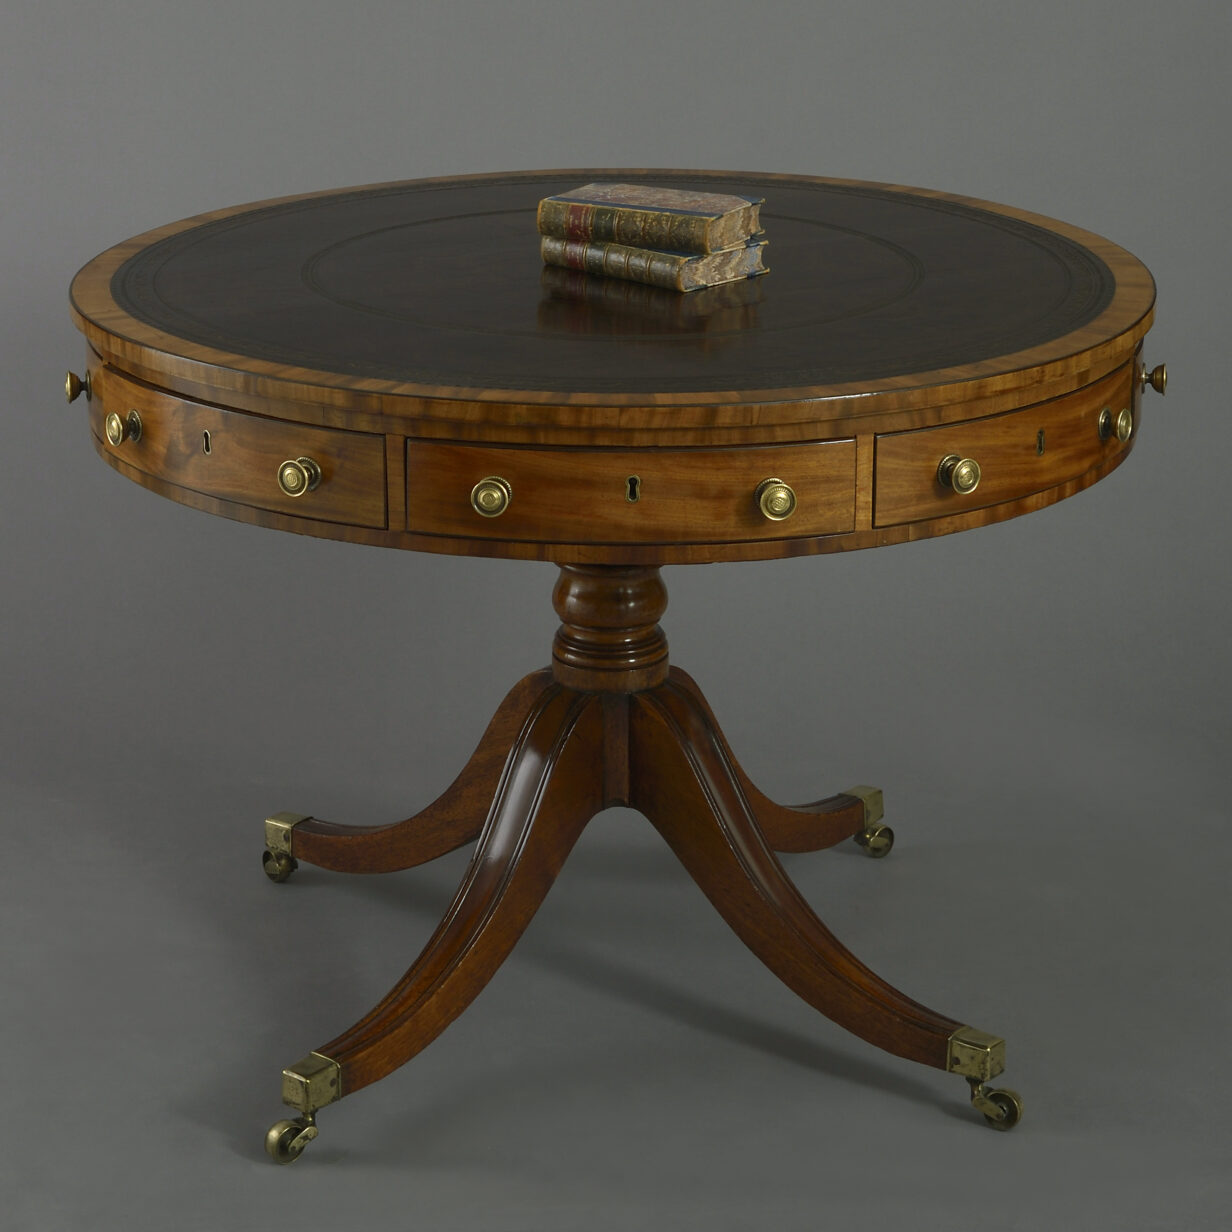 Late 18th century george iii period mahogany drum table